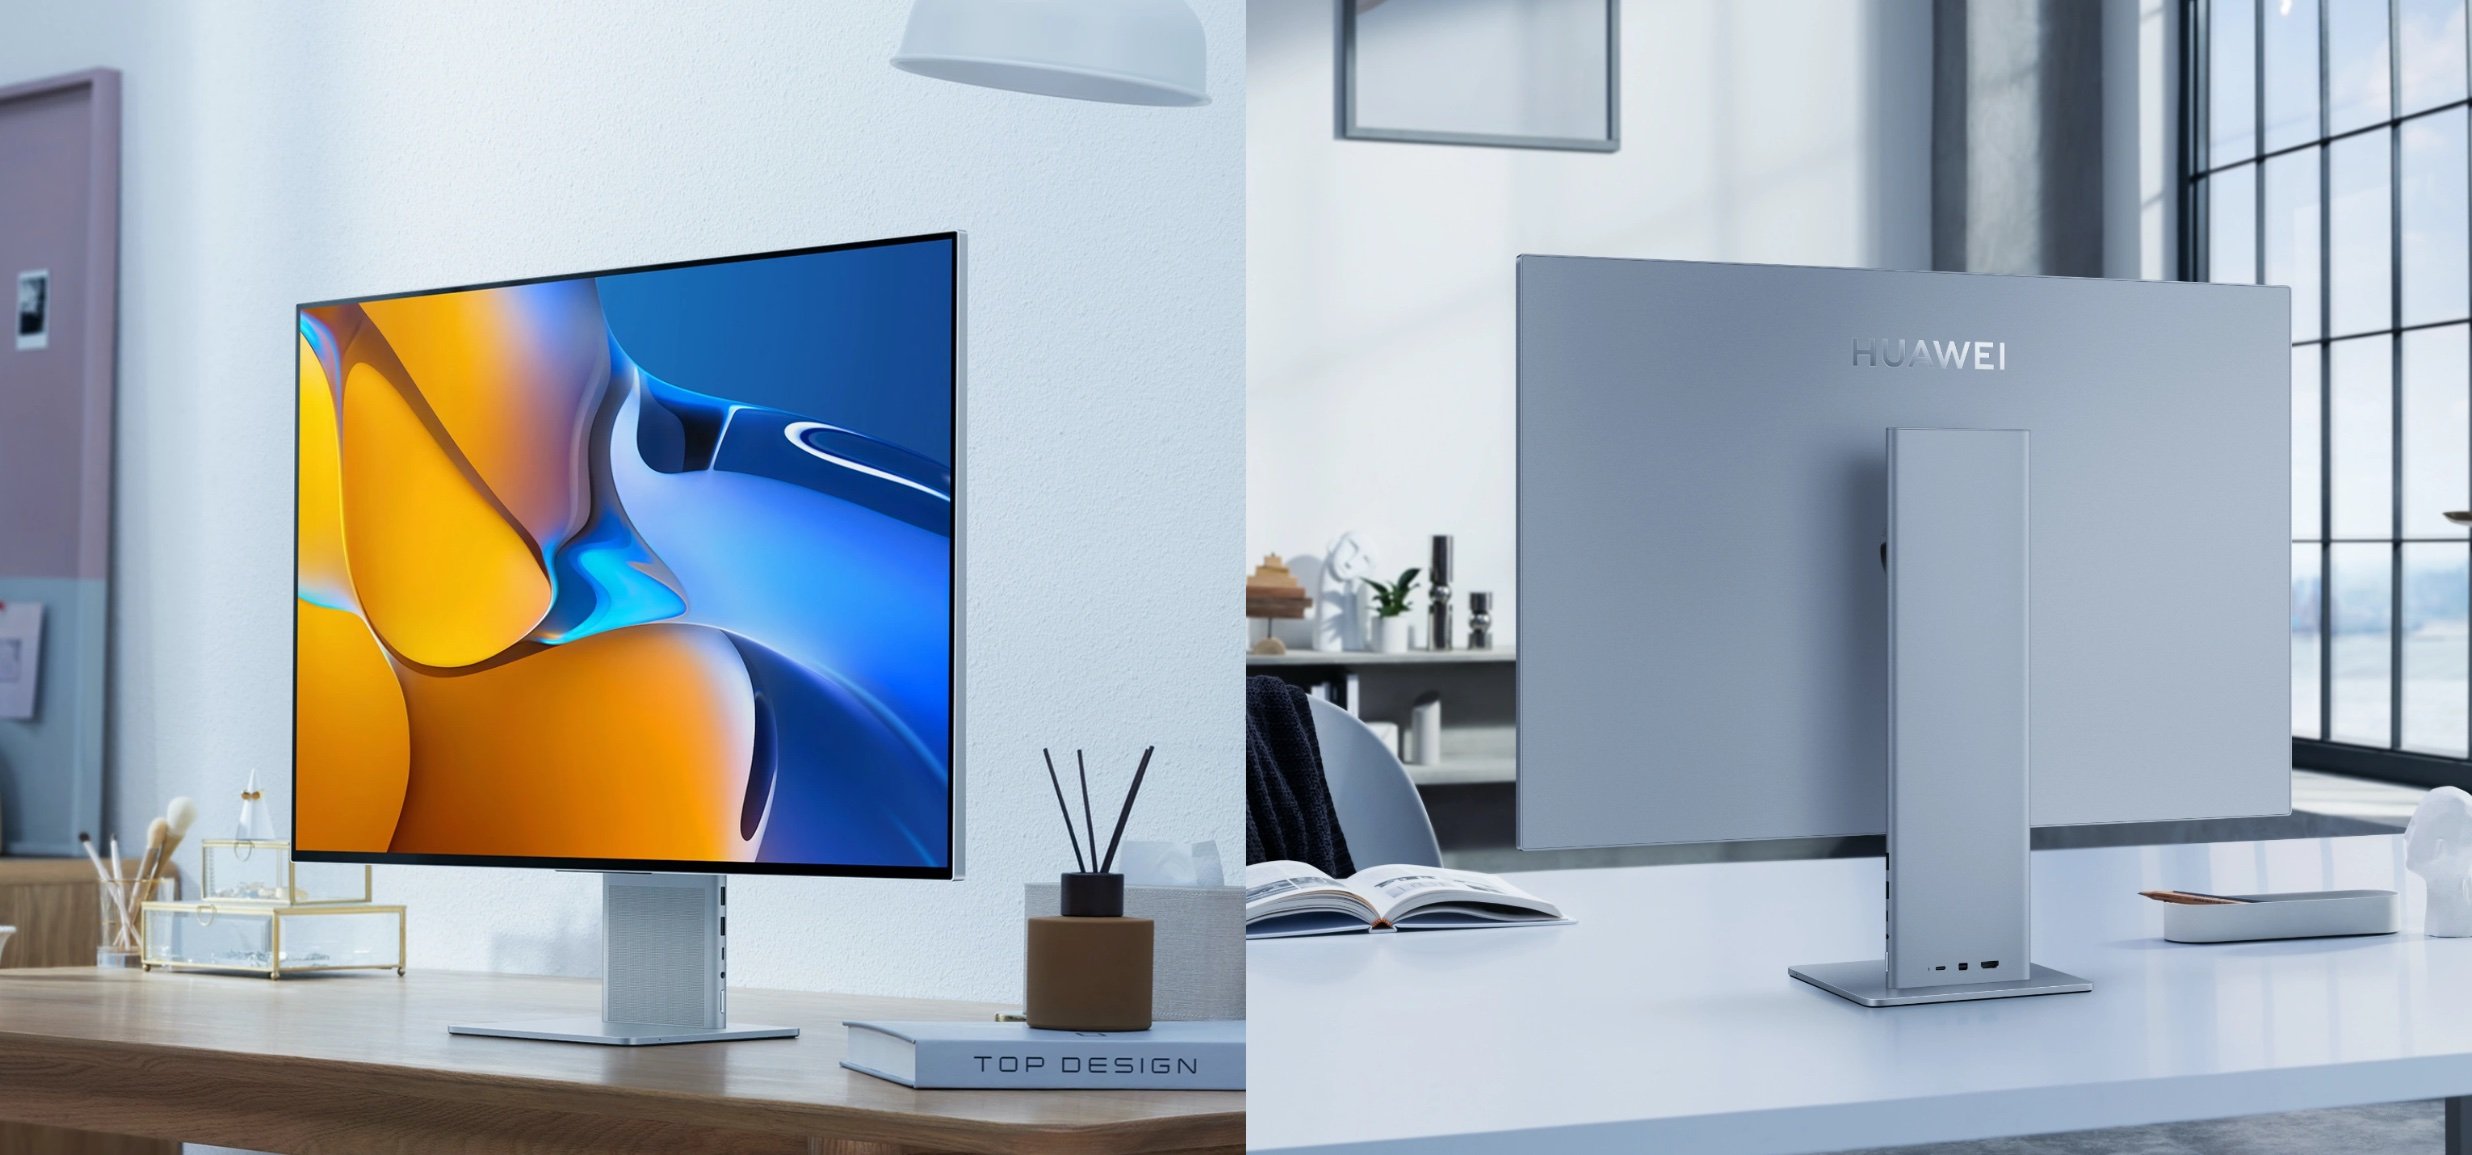 Why can't I buy this monitor beauty in Germany? - Free to Download APK ...